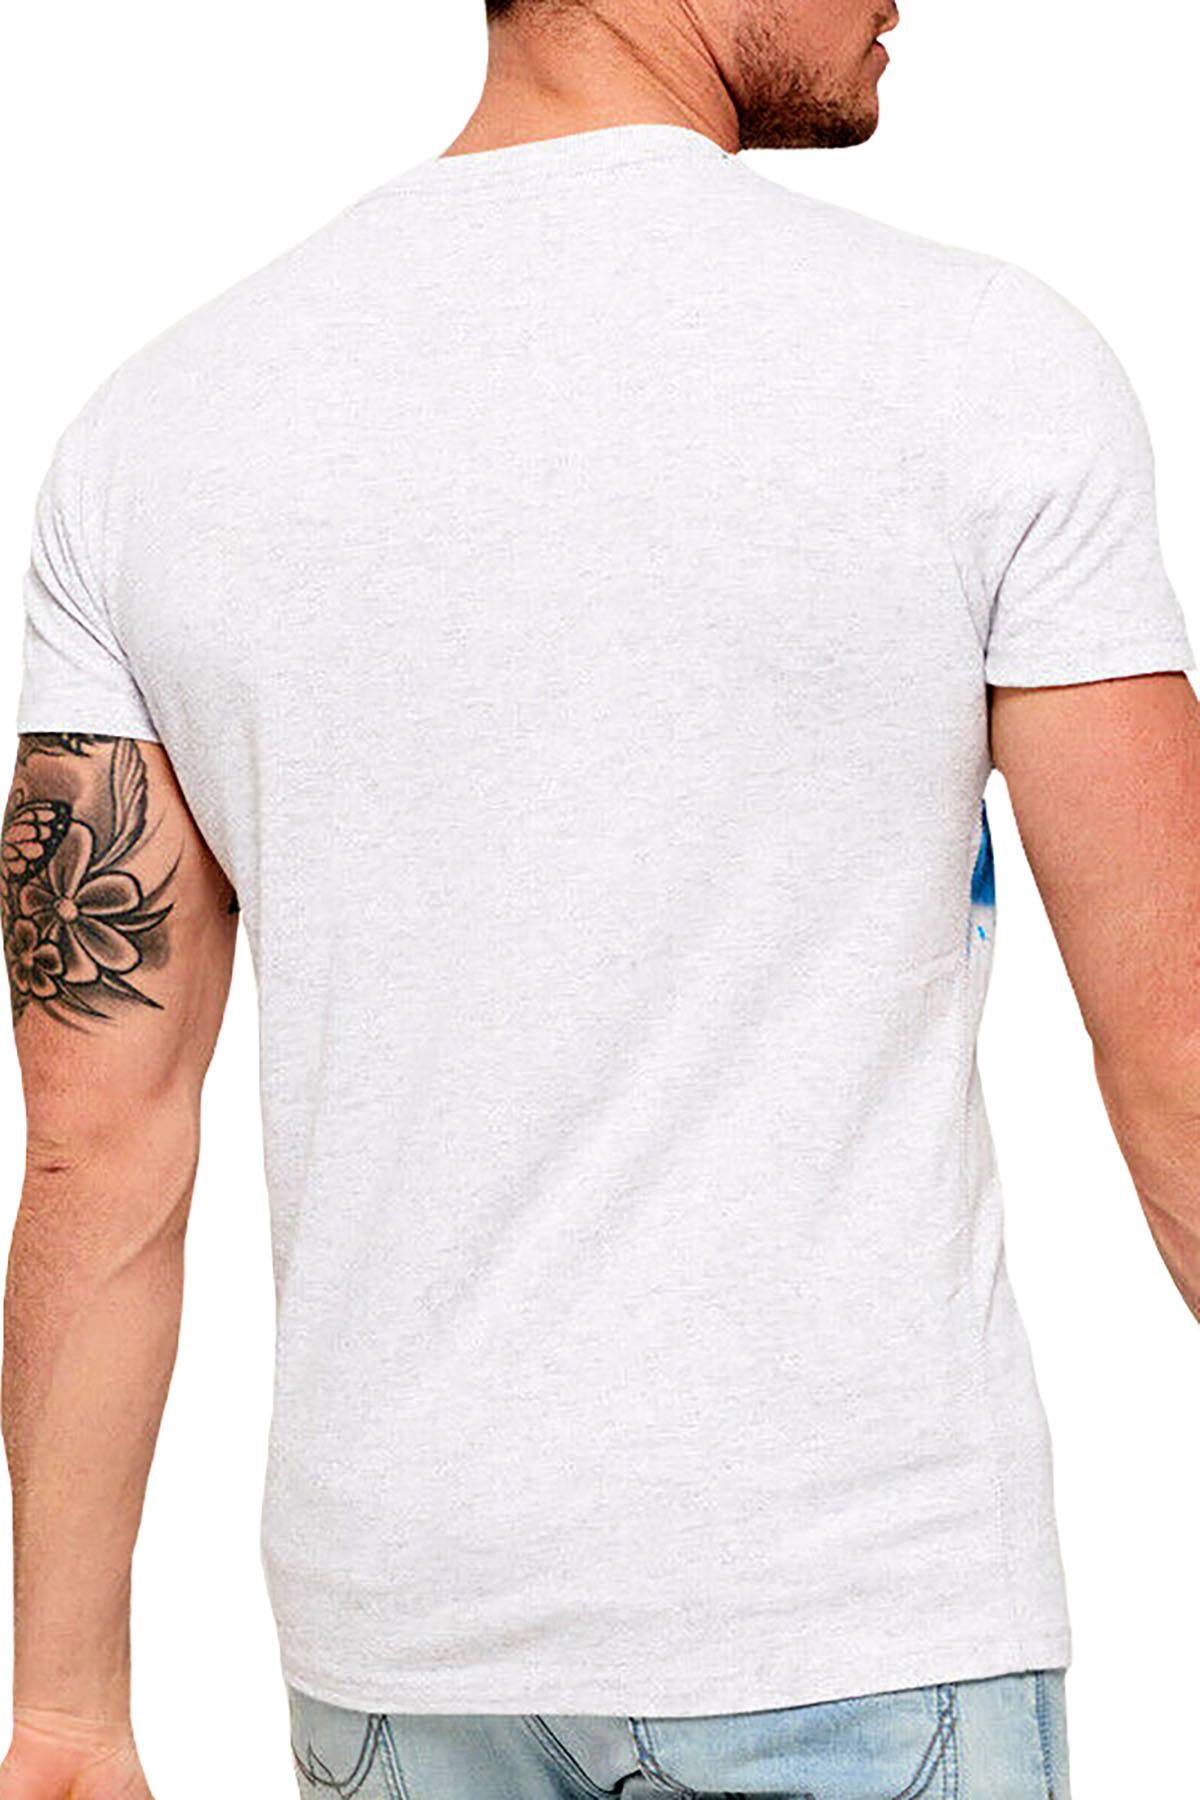 SuperDry Silver-Birch Marl Icarus T-Shirt